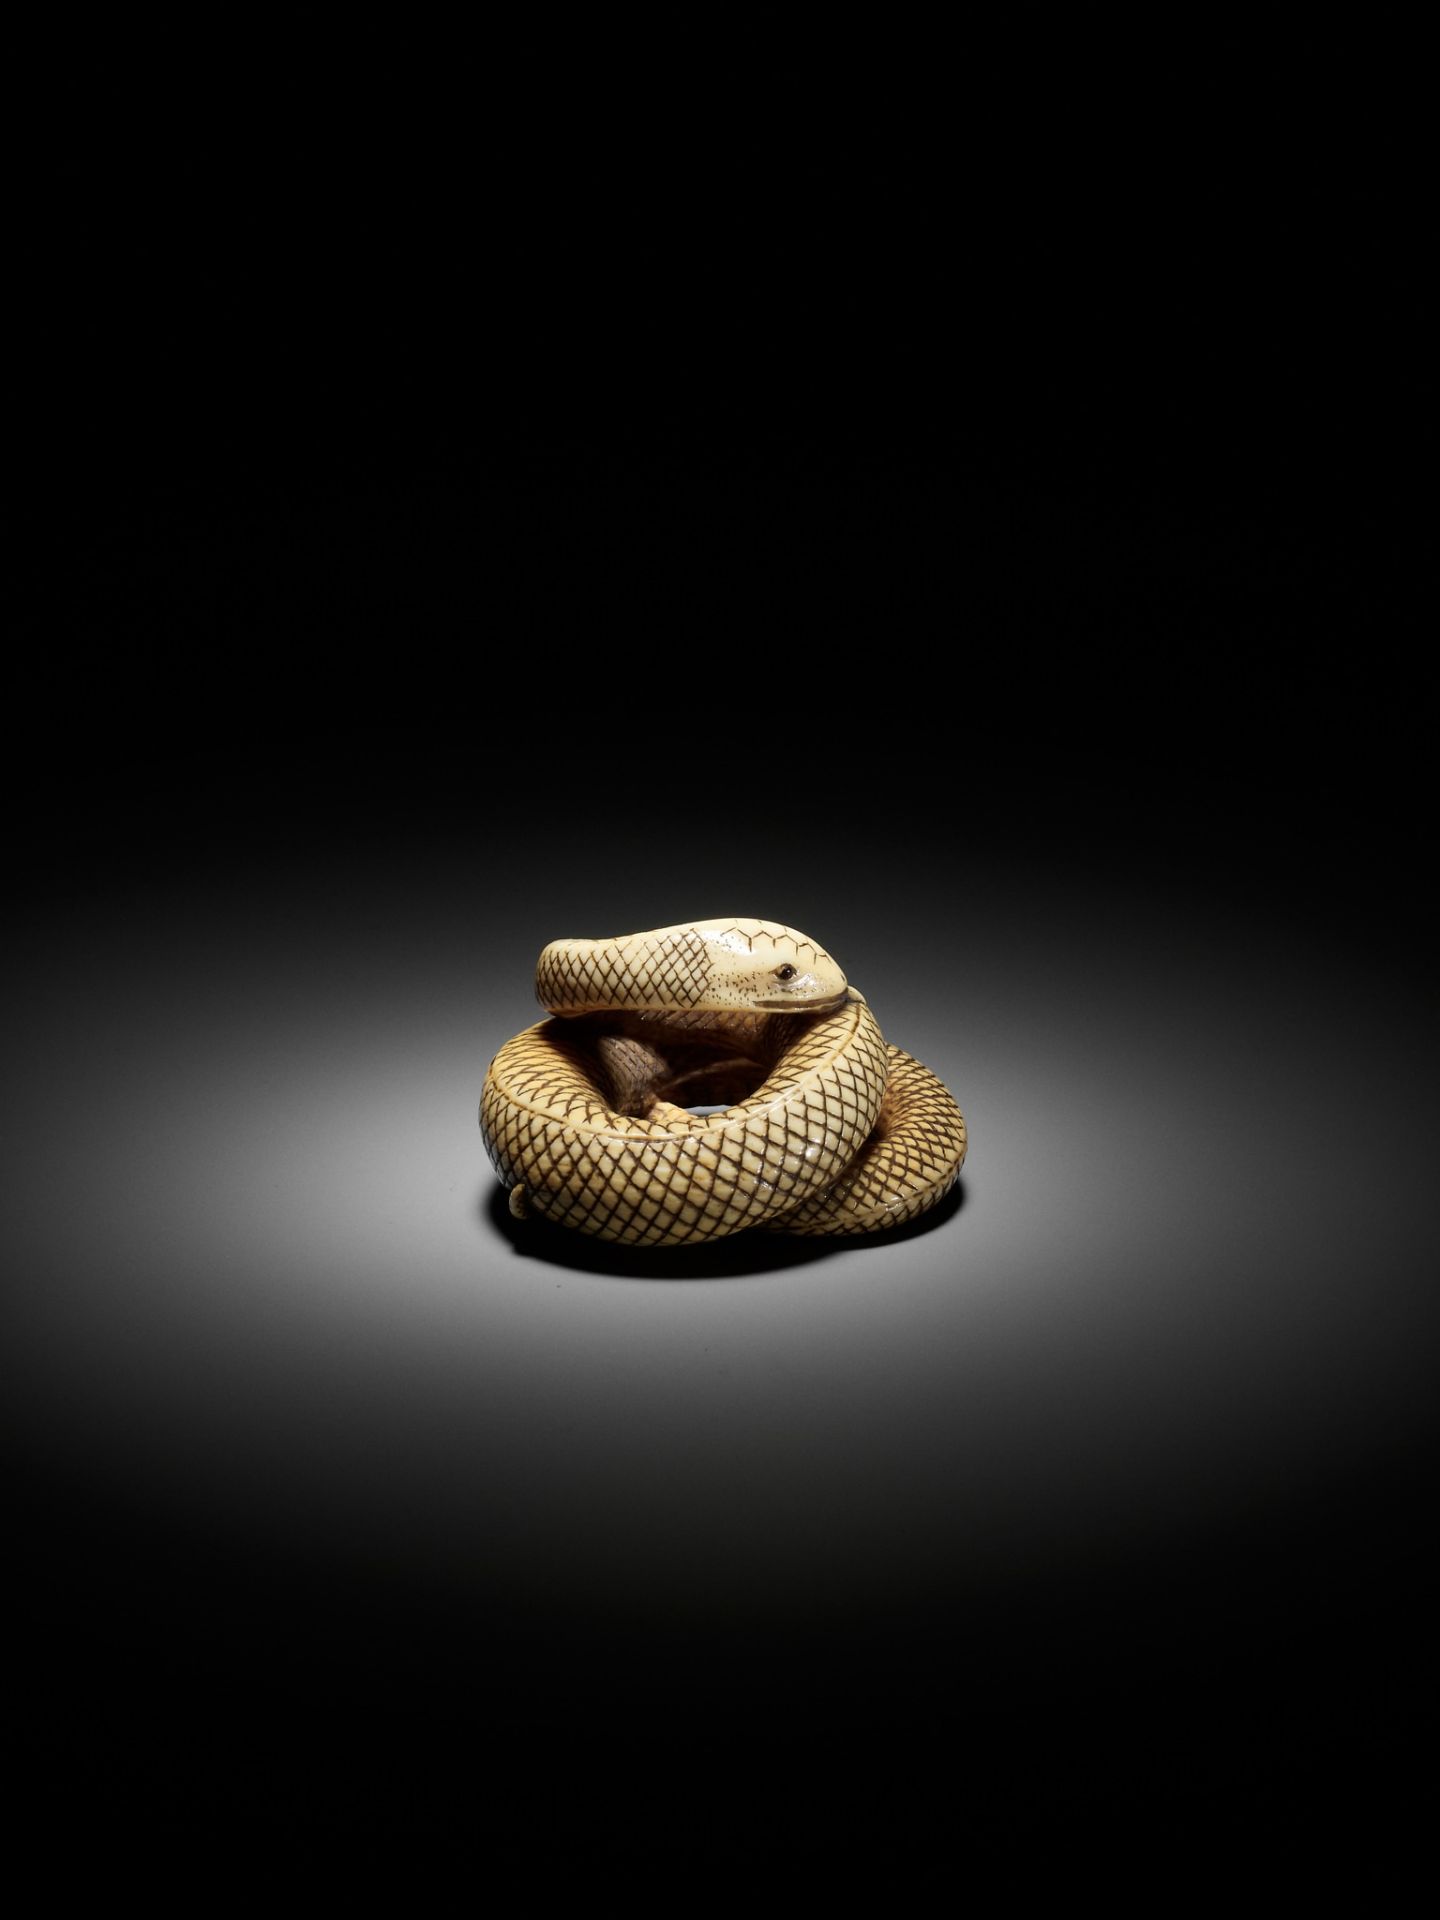 AN IVORY NETSUKE OF A COILED SNAKE, ATTRIBUTED TO OKATOMO - Image 10 of 16